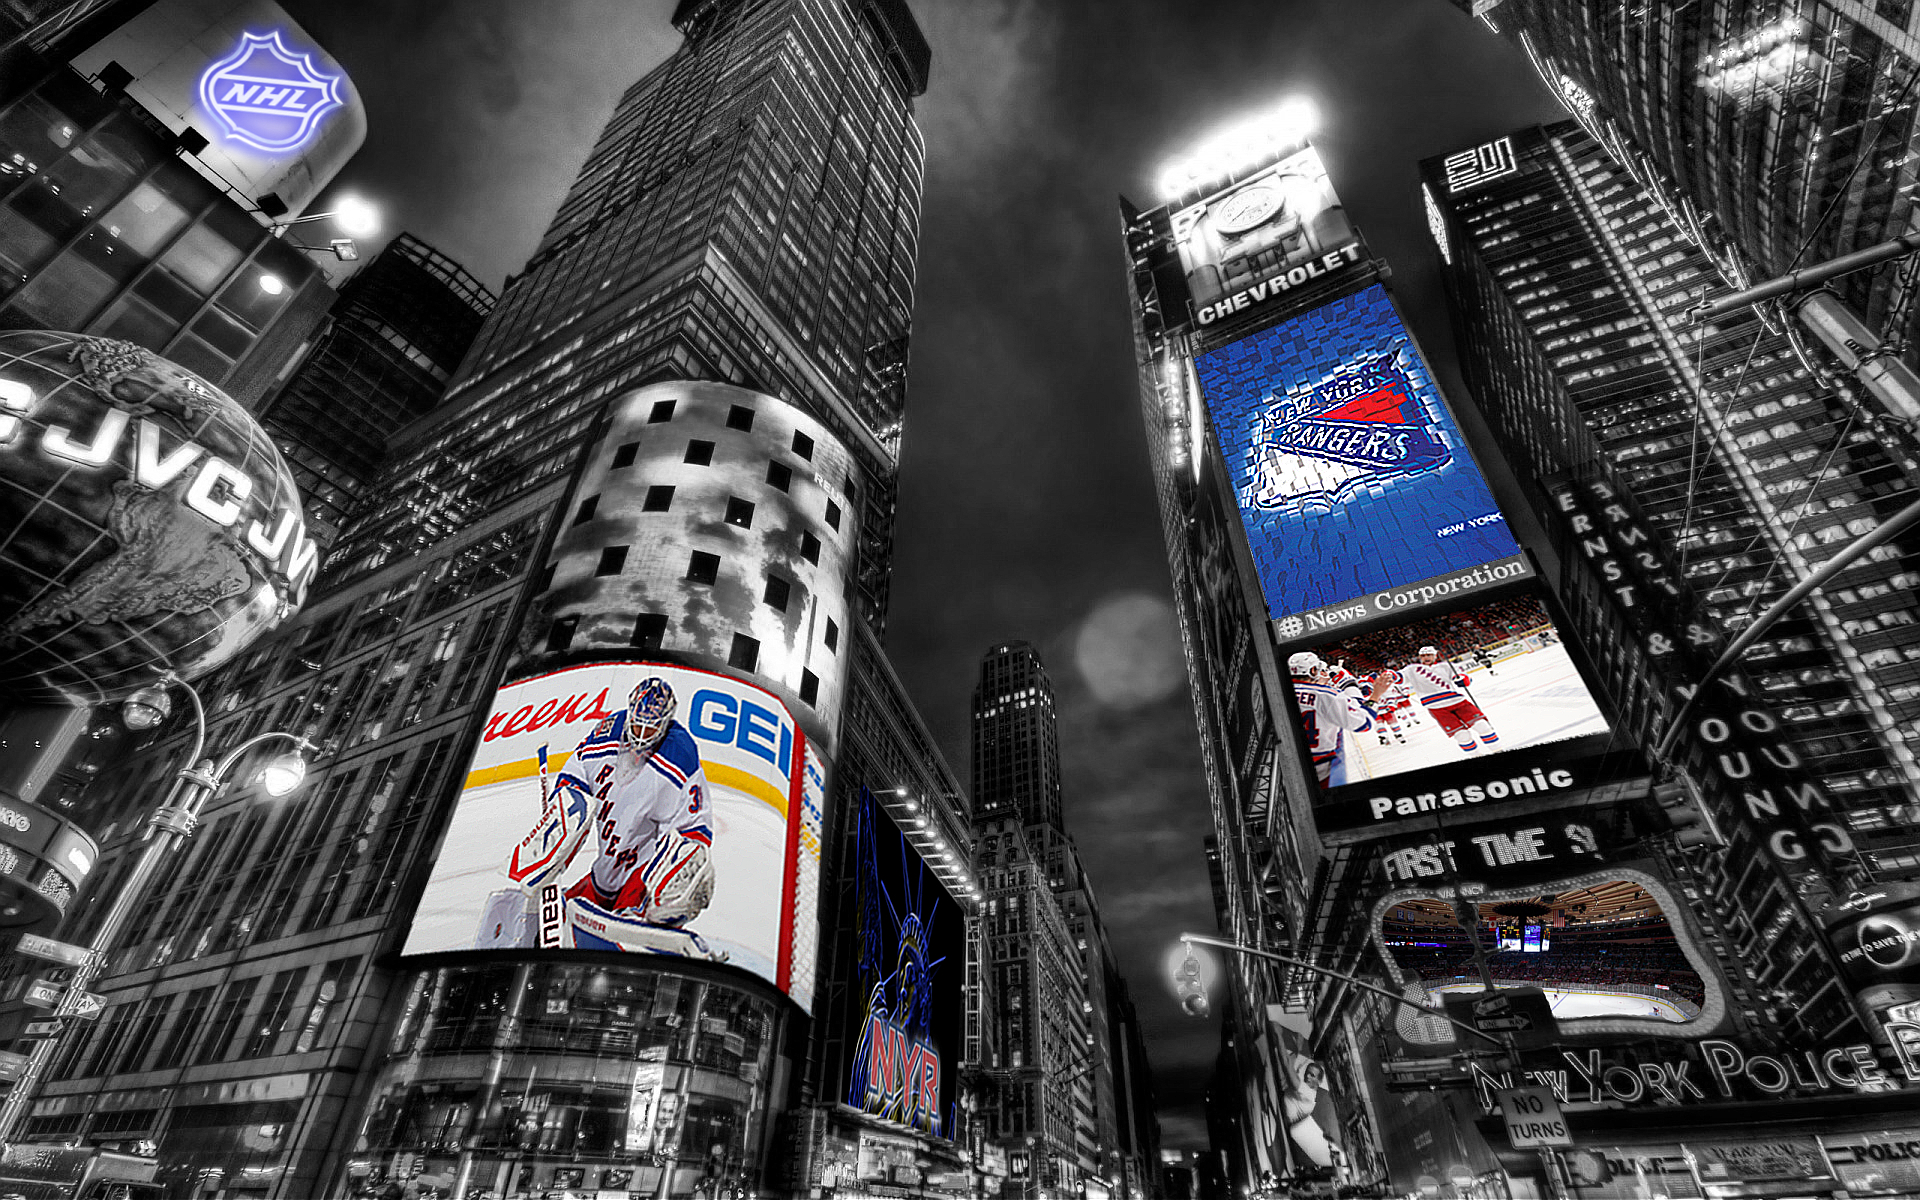  about New York Rangers or even videos related to New York Rangers